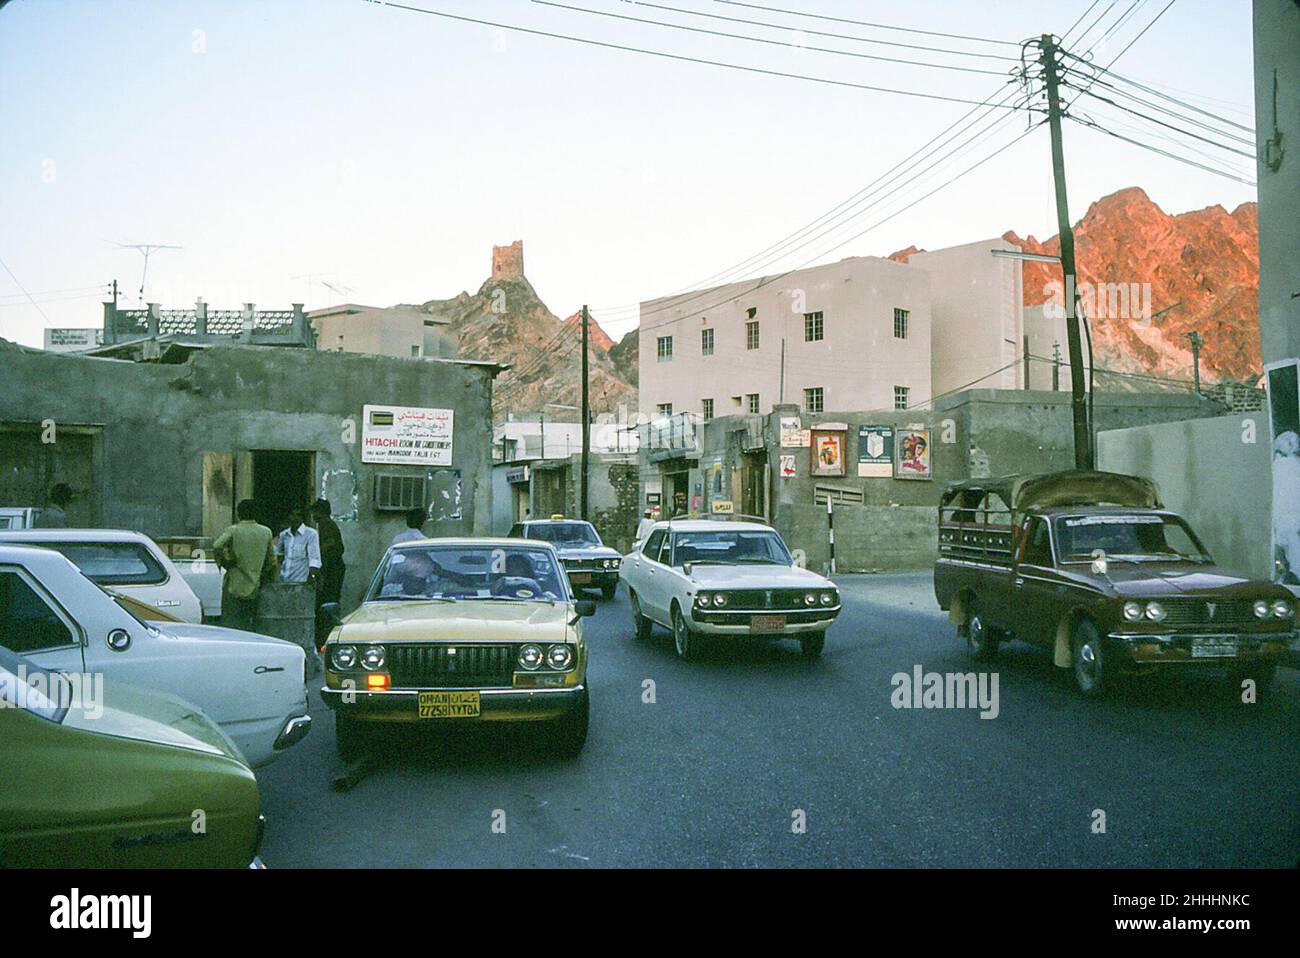 Shops, a watch tower and cars in Muscat, Oman, May 1978 Stock Photo